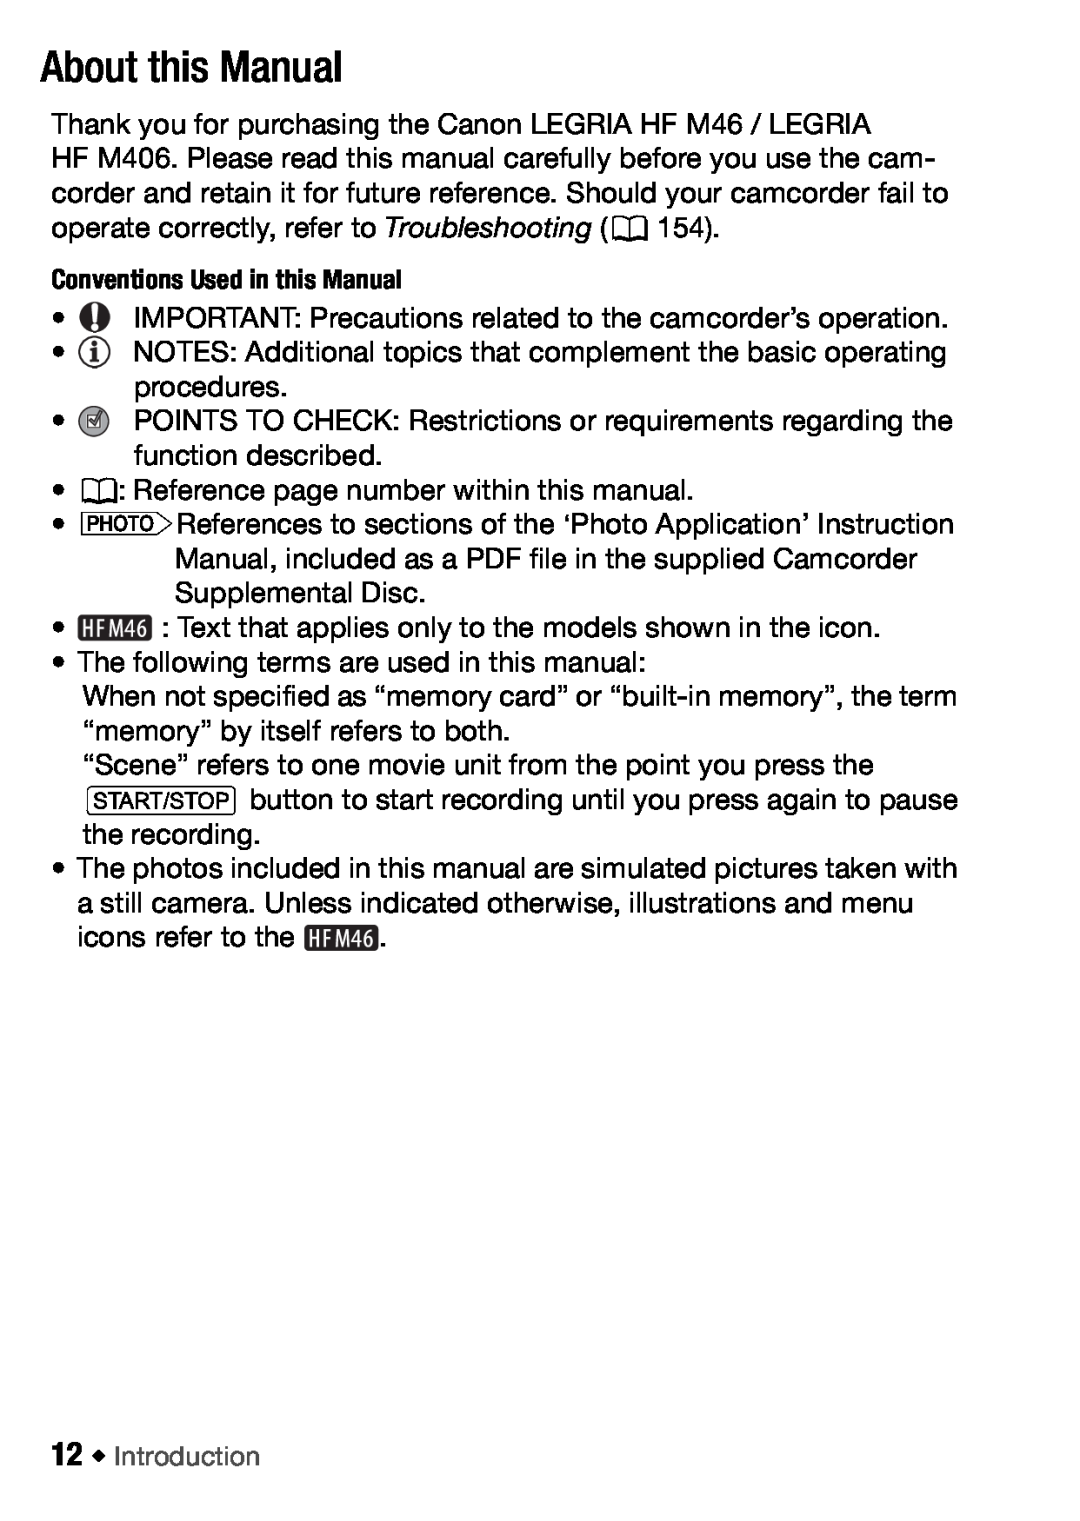 Canon HFM406, HFM46 instruction manual About this Manual 